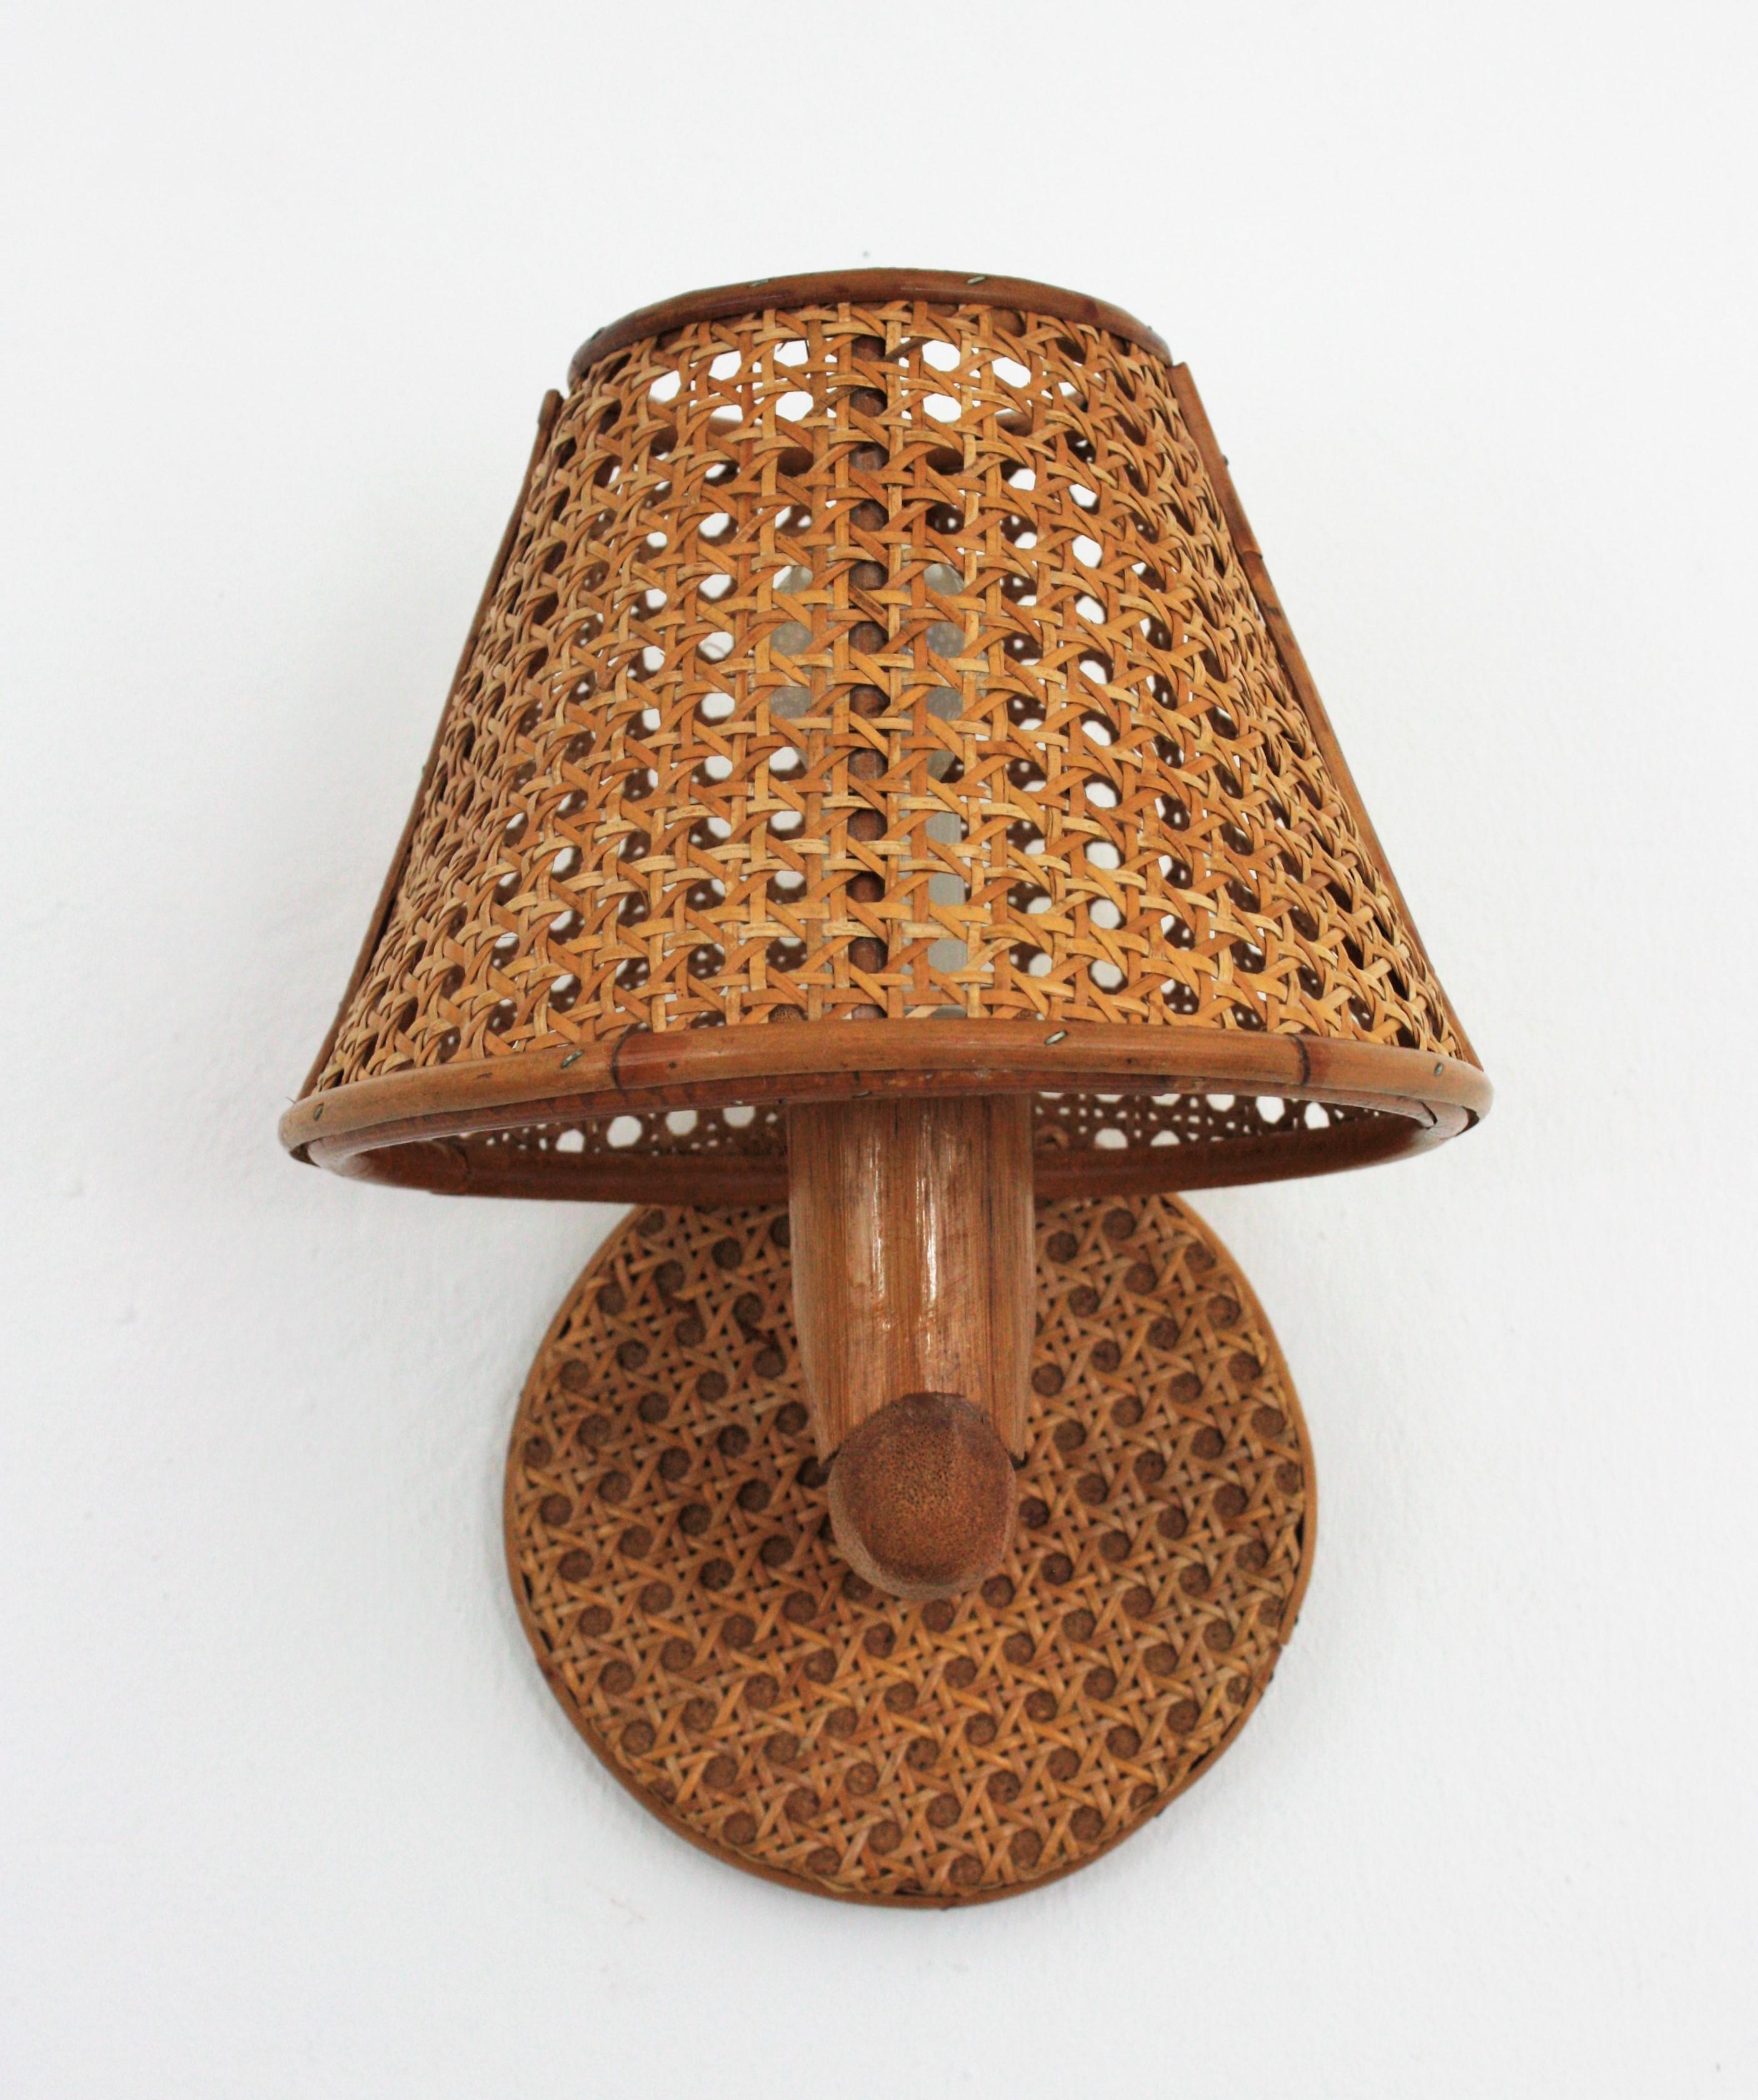 Eye-catching Mid-Century Modern wicker and bamboo wall light with wicker weave shade, Italy, 1960s.
This wall sconce features a round backplate covered with wicker wire holding a bamboo arm with a wicker wire lampshade.
It will be the perfect